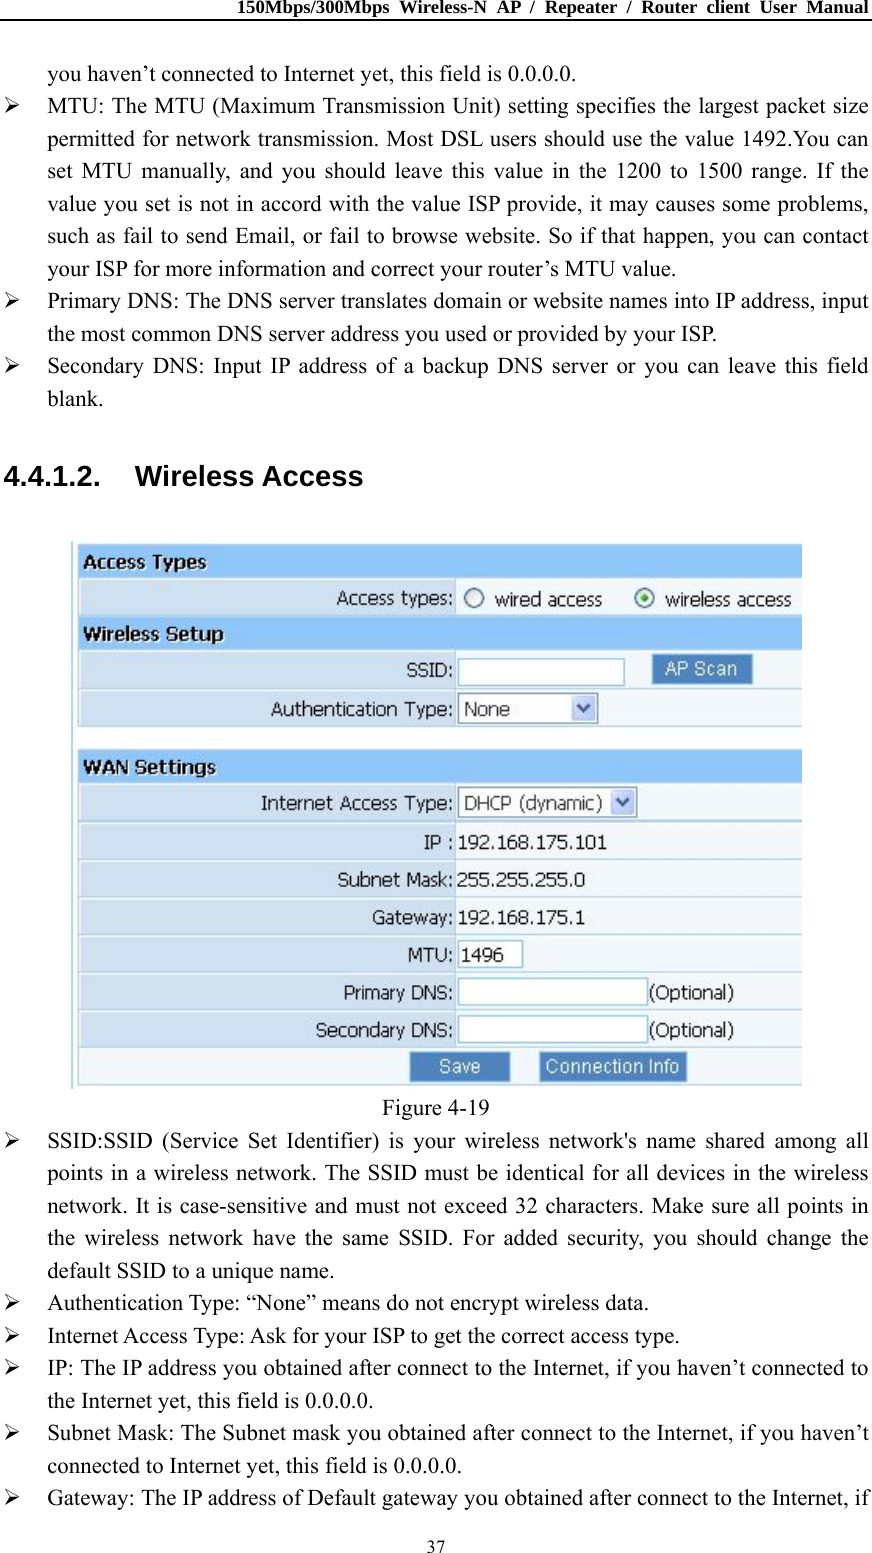 150Mbps/300Mbps Wireless-N AP / Repeater / Router client User Manual  37you haven’t connected to Internet yet, this field is 0.0.0.0.  MTU: The MTU (Maximum Transmission Unit) setting specifies the largest packet size permitted for network transmission. Most DSL users should use the value 1492.You can set MTU manually, and you should leave this value in the 1200 to 1500 range. If the value you set is not in accord with the value ISP provide, it may causes some problems, such as fail to send Email, or fail to browse website. So if that happen, you can contact your ISP for more information and correct your router’s MTU value.  Primary DNS: The DNS server translates domain or website names into IP address, input the most common DNS server address you used or provided by your ISP.  Secondary DNS: Input IP address of a backup DNS server or you can leave this field blank. 4.4.1.2. Wireless Access  Figure 4-19  SSID:SSID (Service Set Identifier) is your wireless network&apos;s name shared among all points in a wireless network. The SSID must be identical for all devices in the wireless network. It is case-sensitive and must not exceed 32 characters. Make sure all points in the wireless network have the same SSID. For added security, you should change the default SSID to a unique name.  Authentication Type: “None” means do not encrypt wireless data.  Internet Access Type: Ask for your ISP to get the correct access type.  IP: The IP address you obtained after connect to the Internet, if you haven’t connected to the Internet yet, this field is 0.0.0.0.  Subnet Mask: The Subnet mask you obtained after connect to the Internet, if you haven’t connected to Internet yet, this field is 0.0.0.0.  Gateway: The IP address of Default gateway you obtained after connect to the Internet, if 